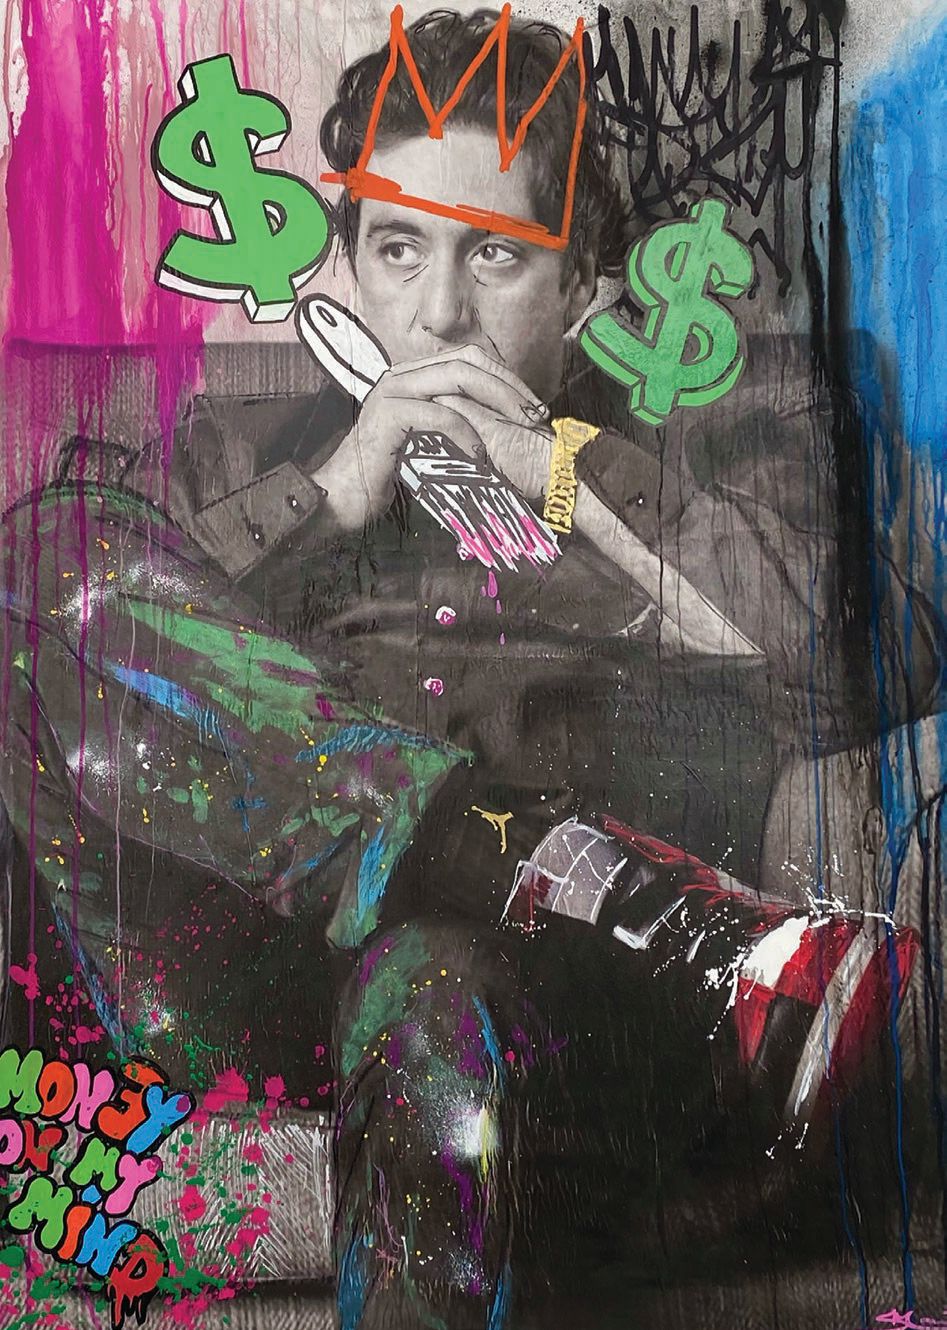 “Money on my mind,” mixed-media hand painting by Skott Marsi in collaboration with London graphic designer Gabriele Soi PHOTO: BY SKOTT MARSI IN COLLABORATION WITH GABRIELE SOI